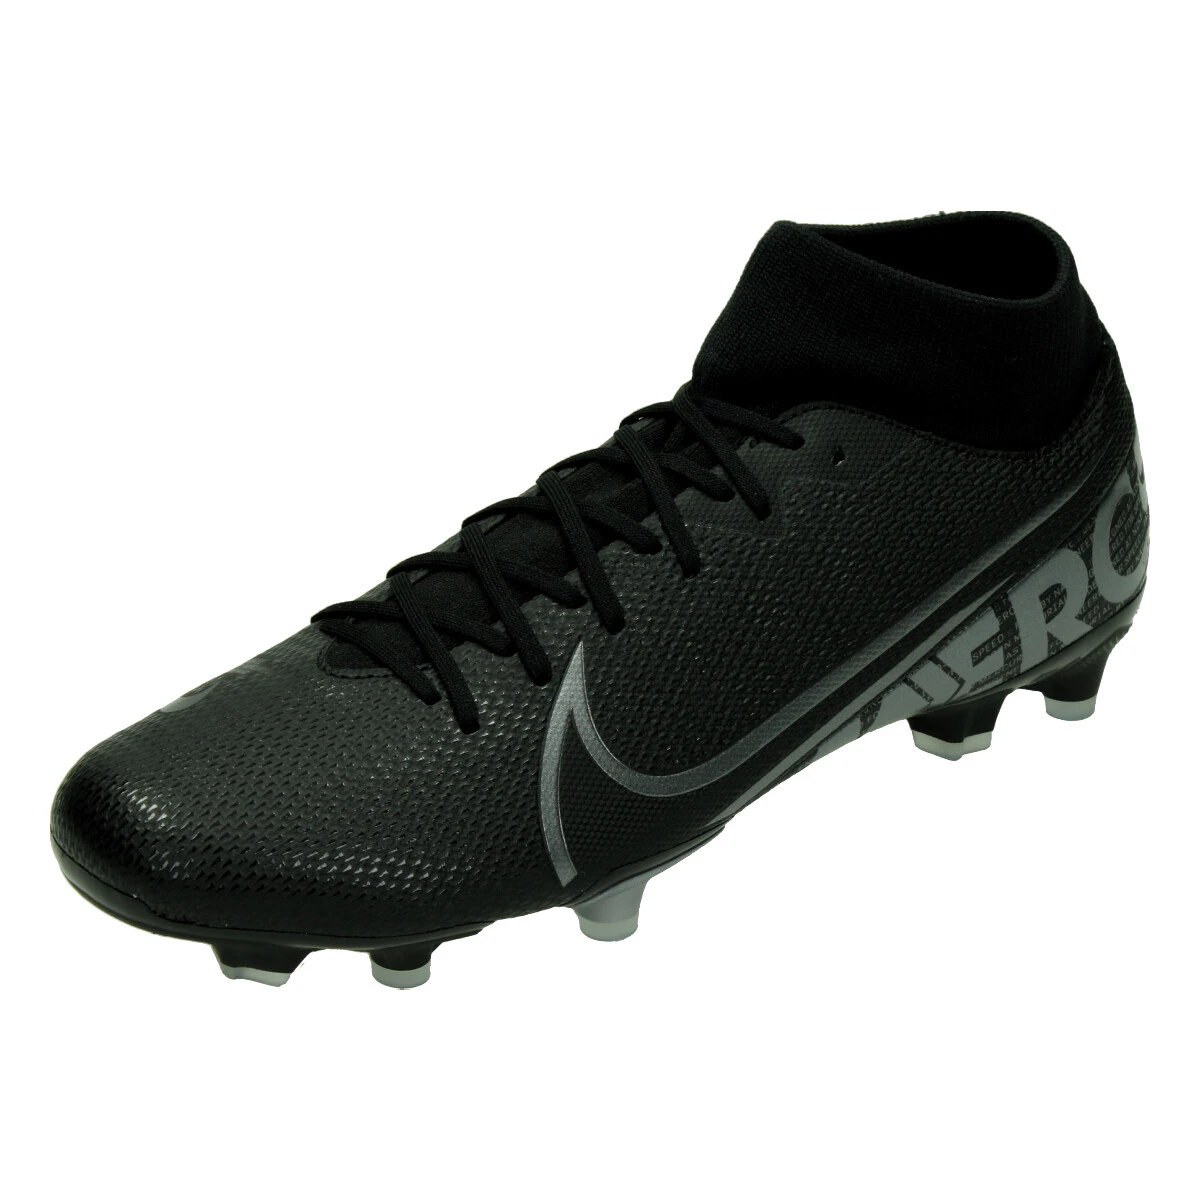 Nike Mercurial Superfly 7 Academy MDS MG Newmarket.